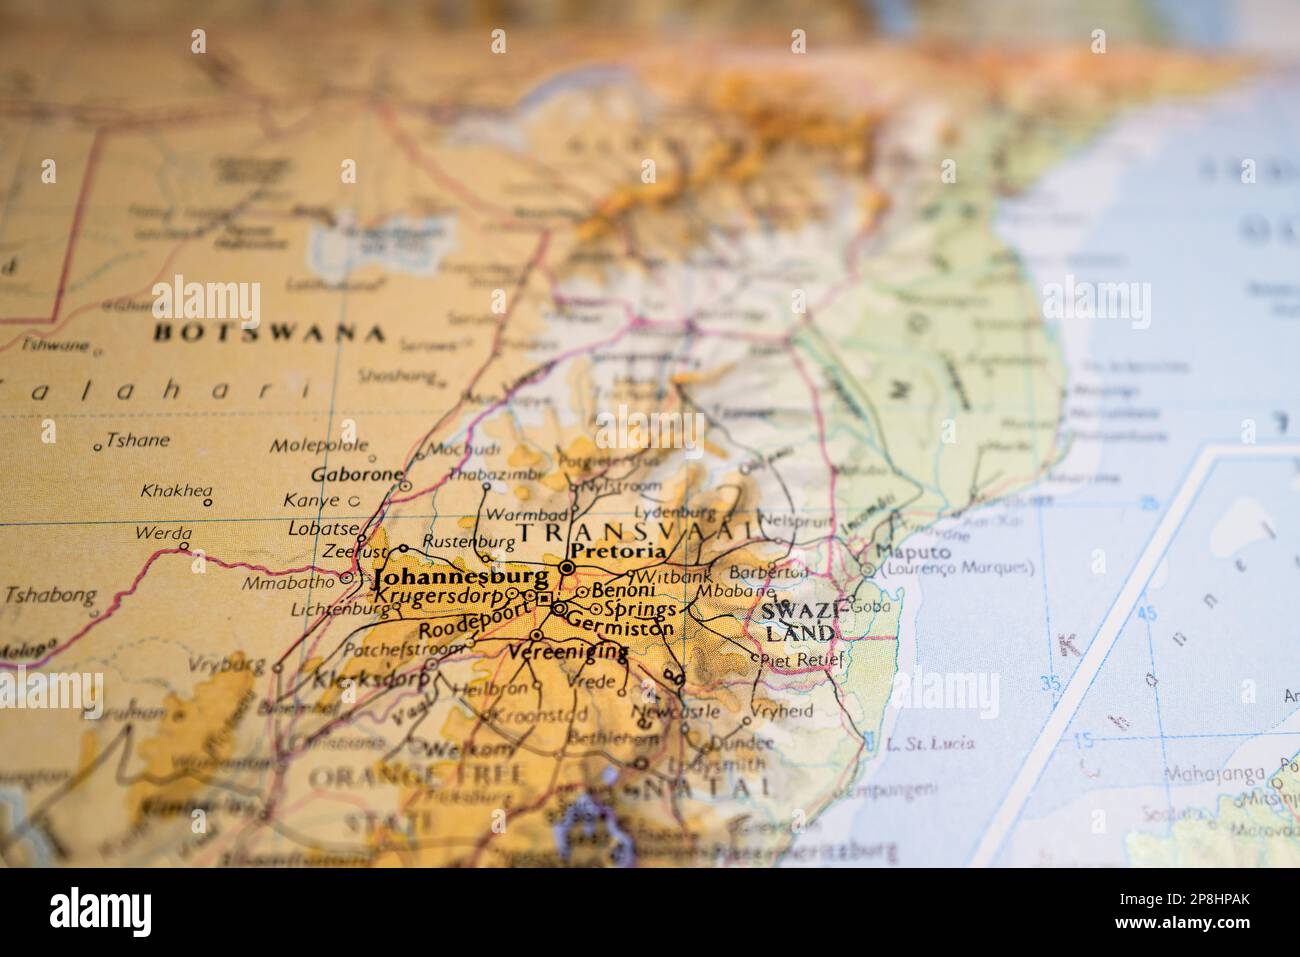 Shallow focus of the Johannesburg text seen on a generic, topographical map of South Africa. Stock Photo